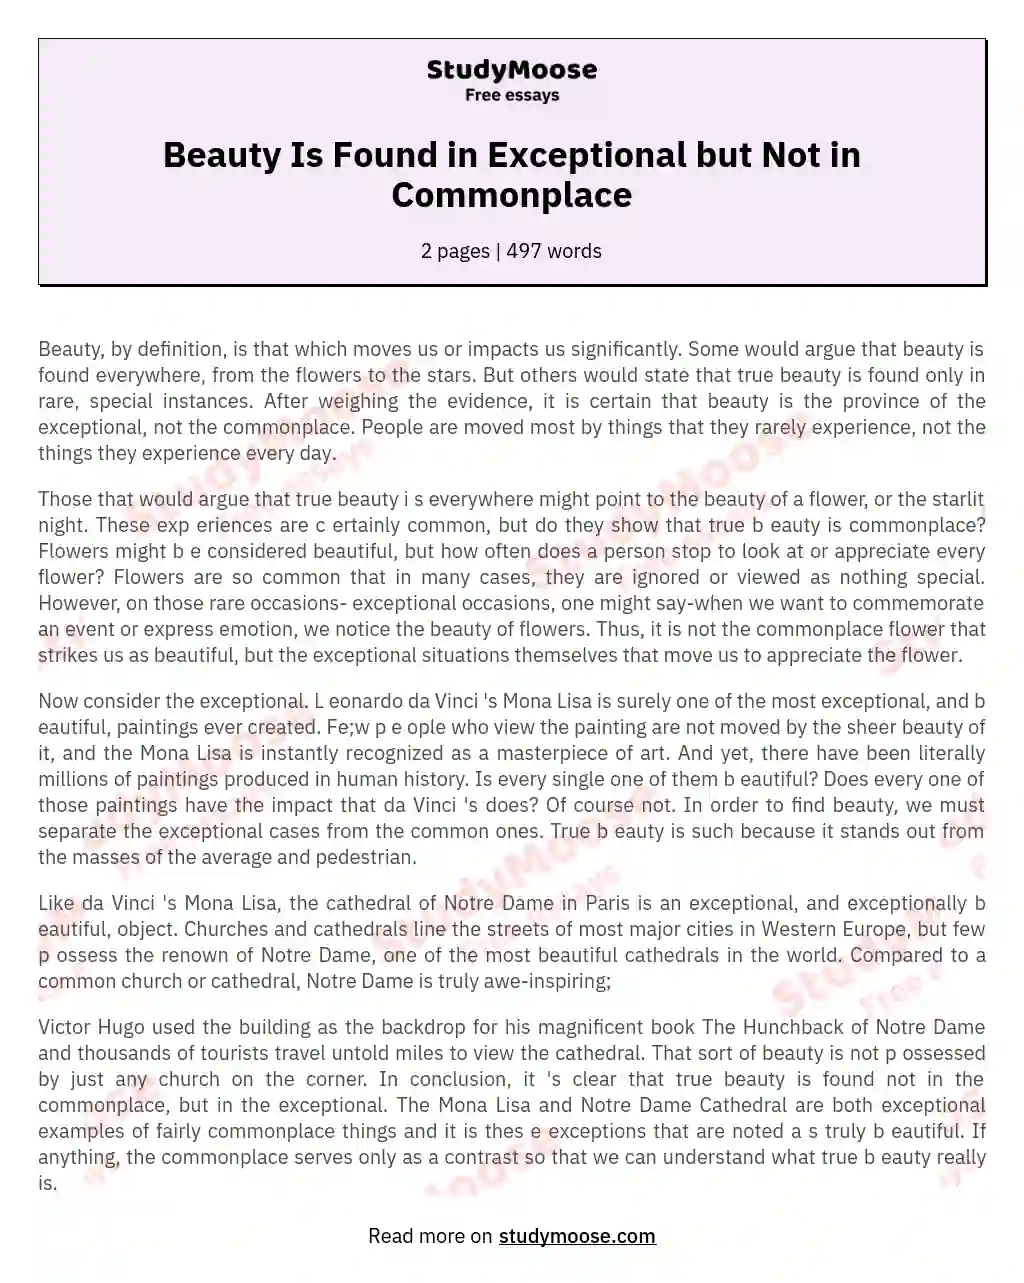 Beauty Is Found in Exceptional but Not in Commonplace essay